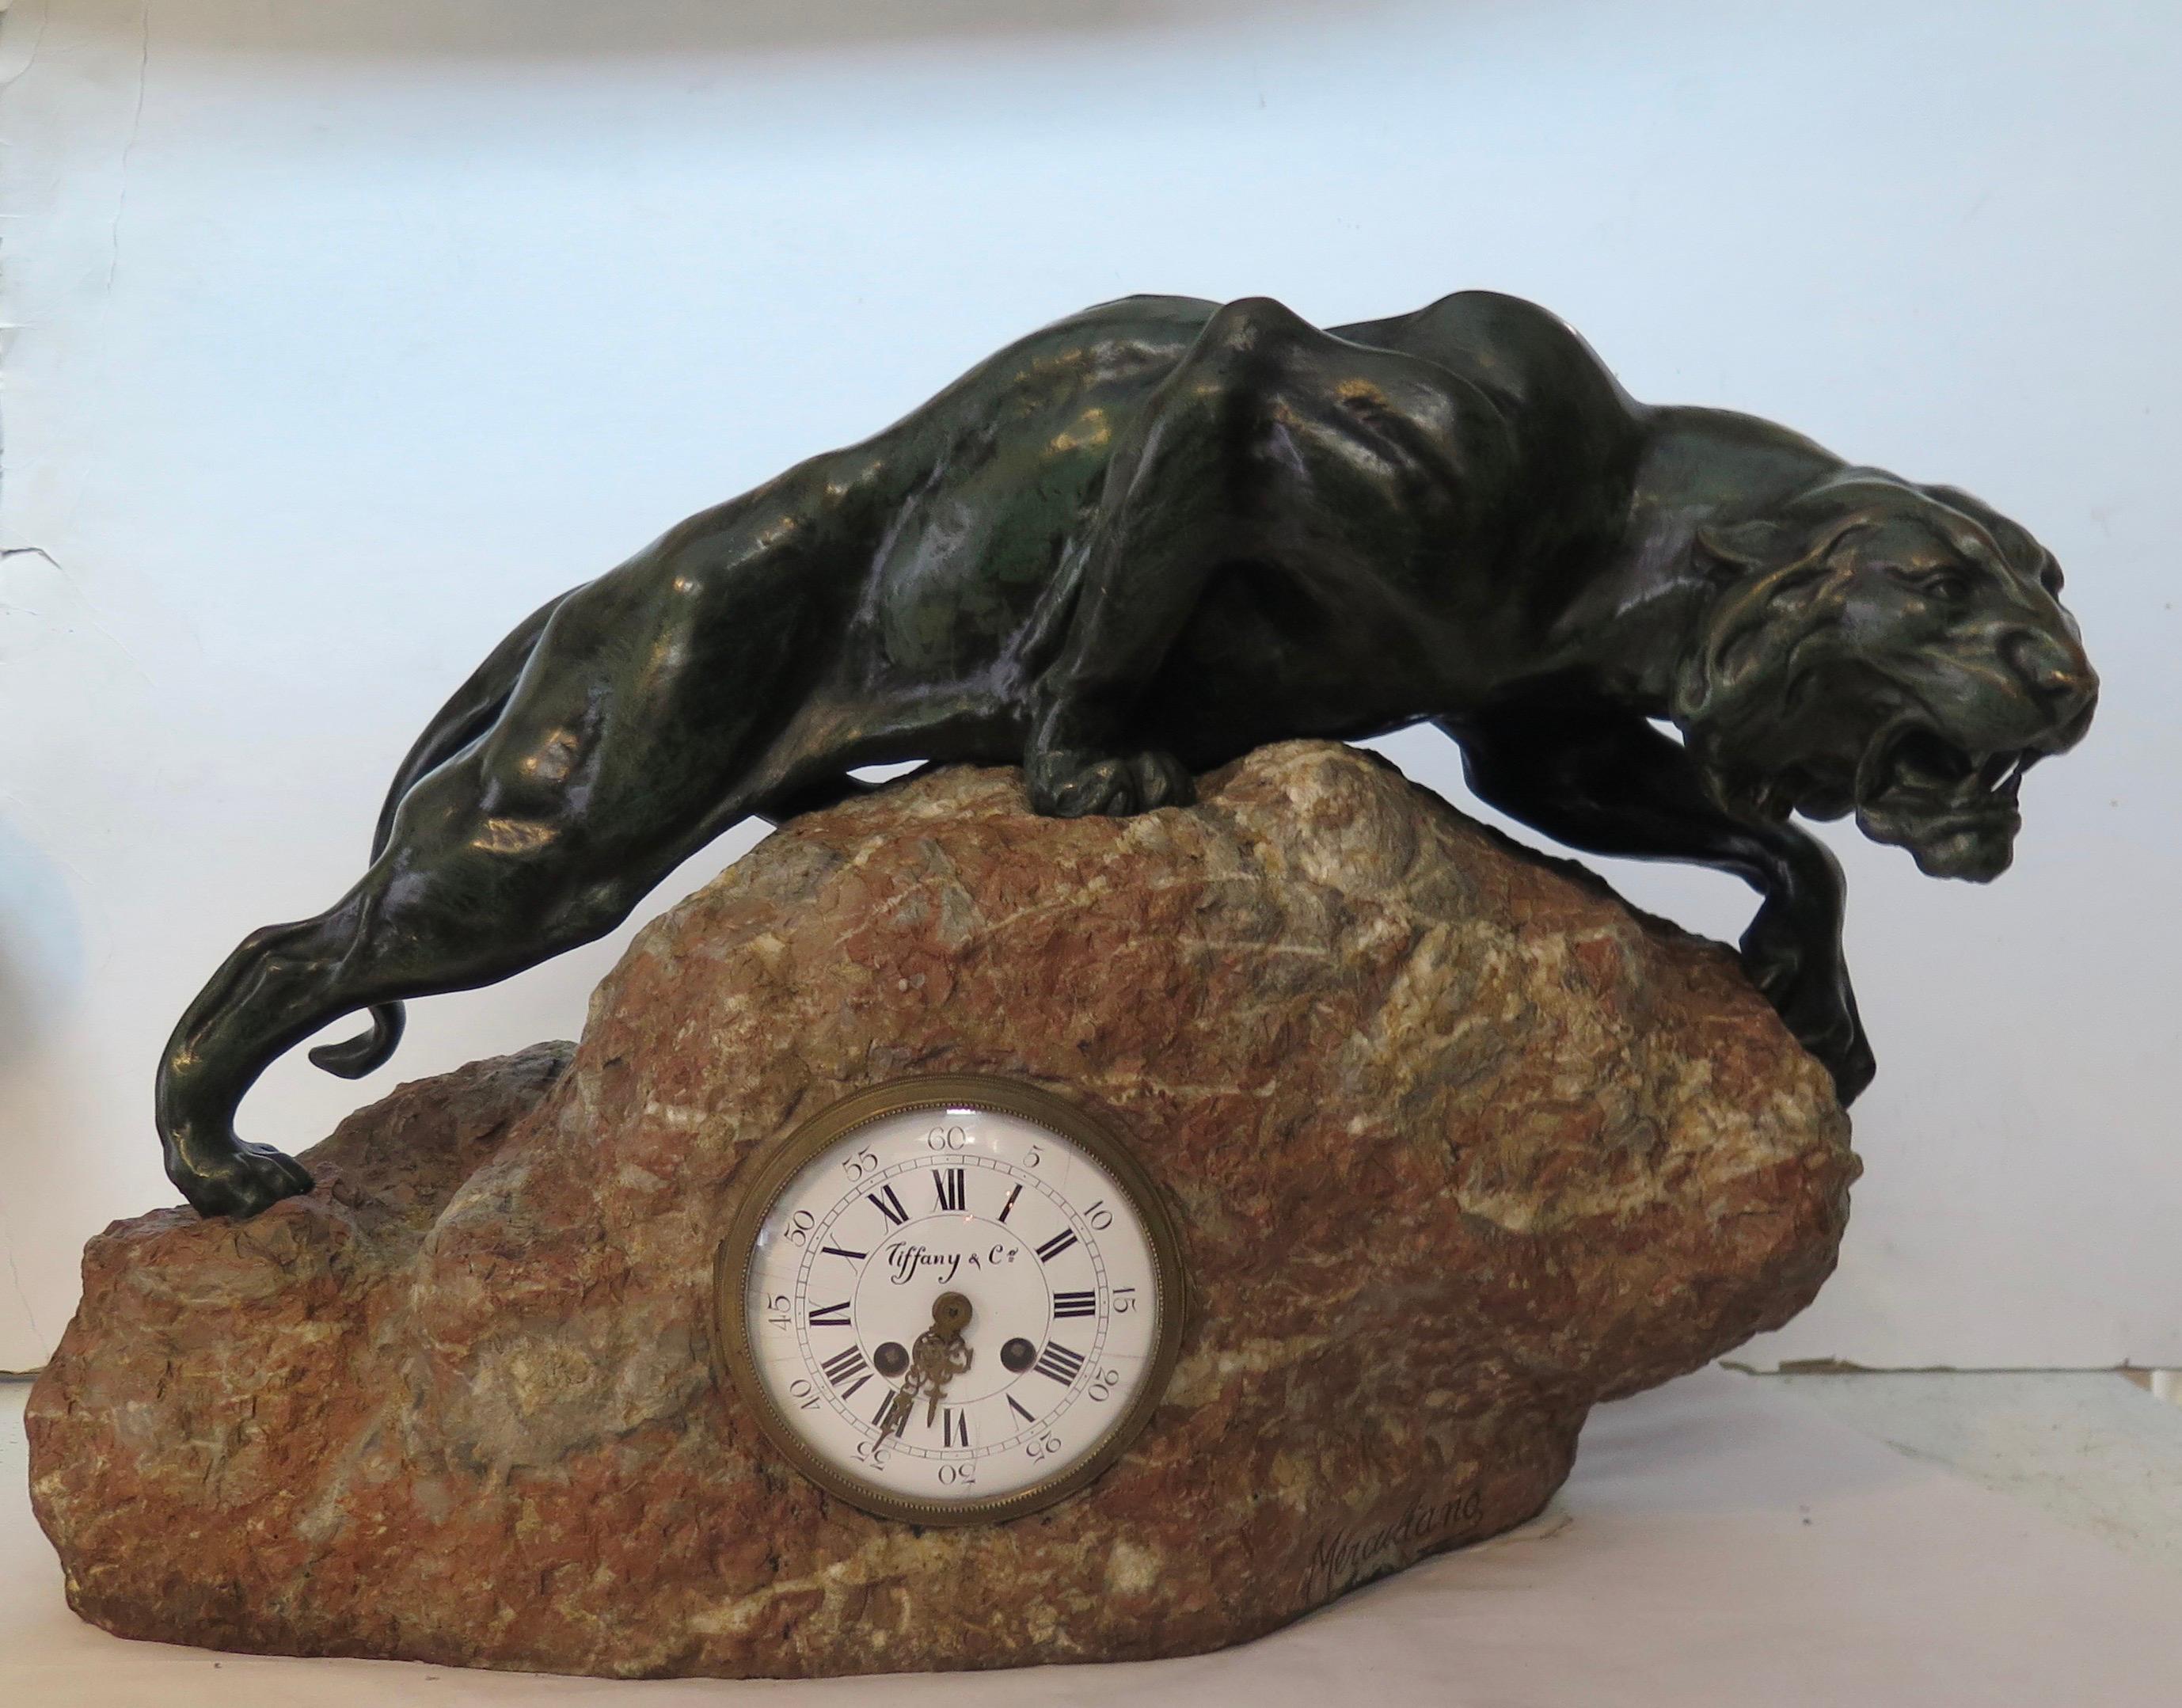 This vintage majestic bronze animal sculpture & clock date from early 1900’s. The sculpture was created & signed by the artist, MERCULIANO. The stunning patinated dark green bronze sculpture of a mountain lion has a beautifully & meticulously